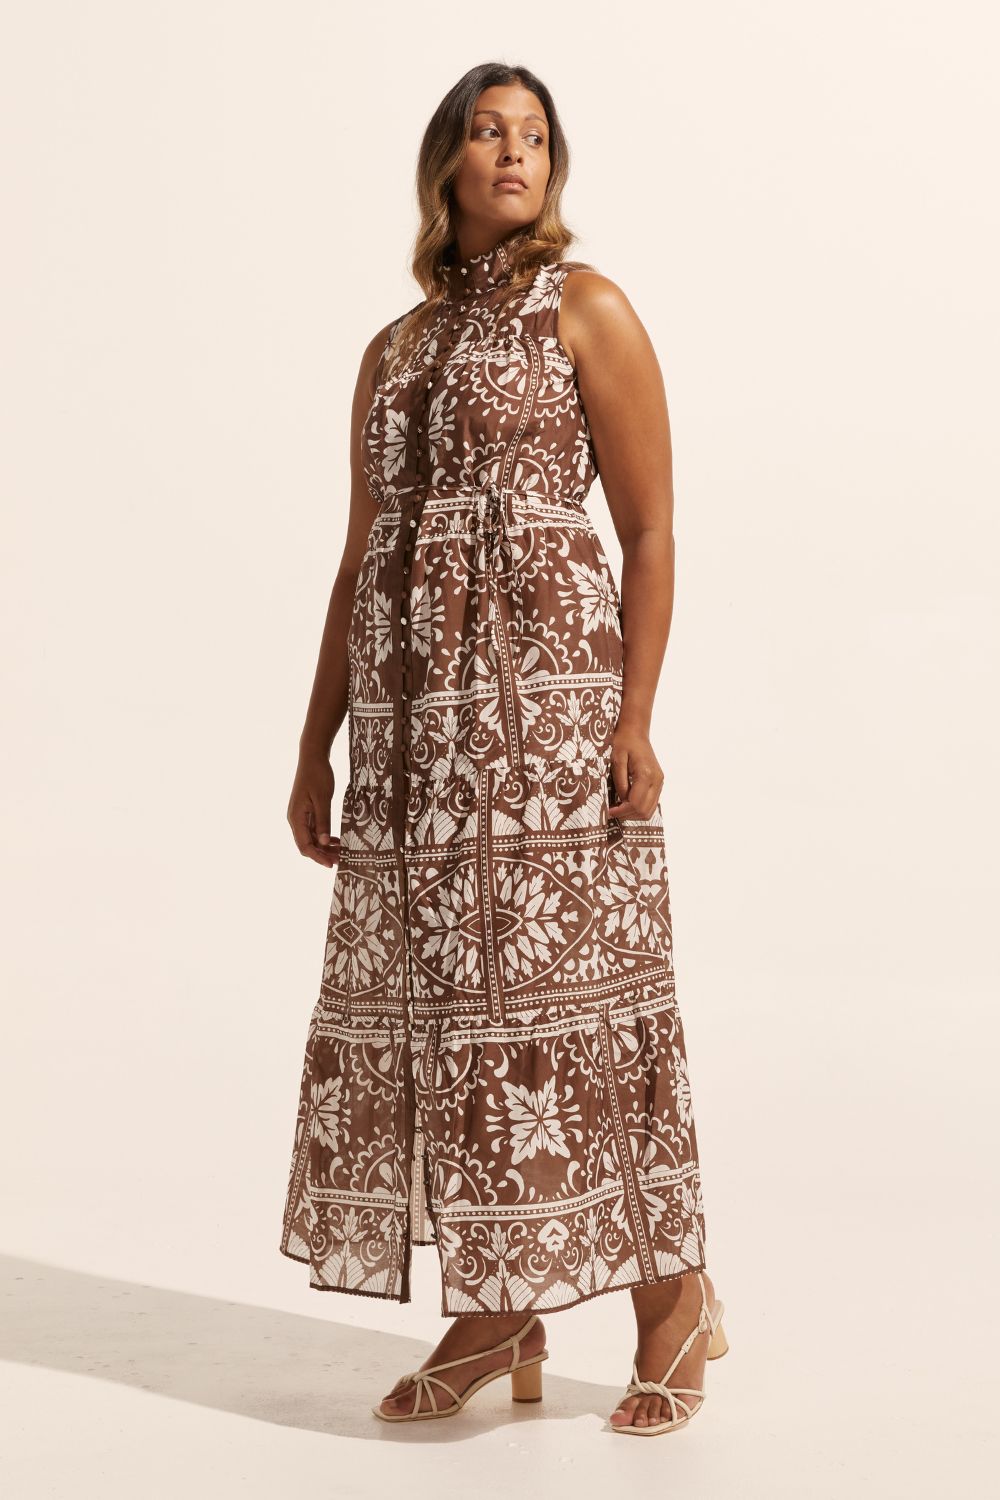 brown and white print, high neck, buttons down centre, thin fabric belt, sleeveless, dress, size 12 model wearing a size 1